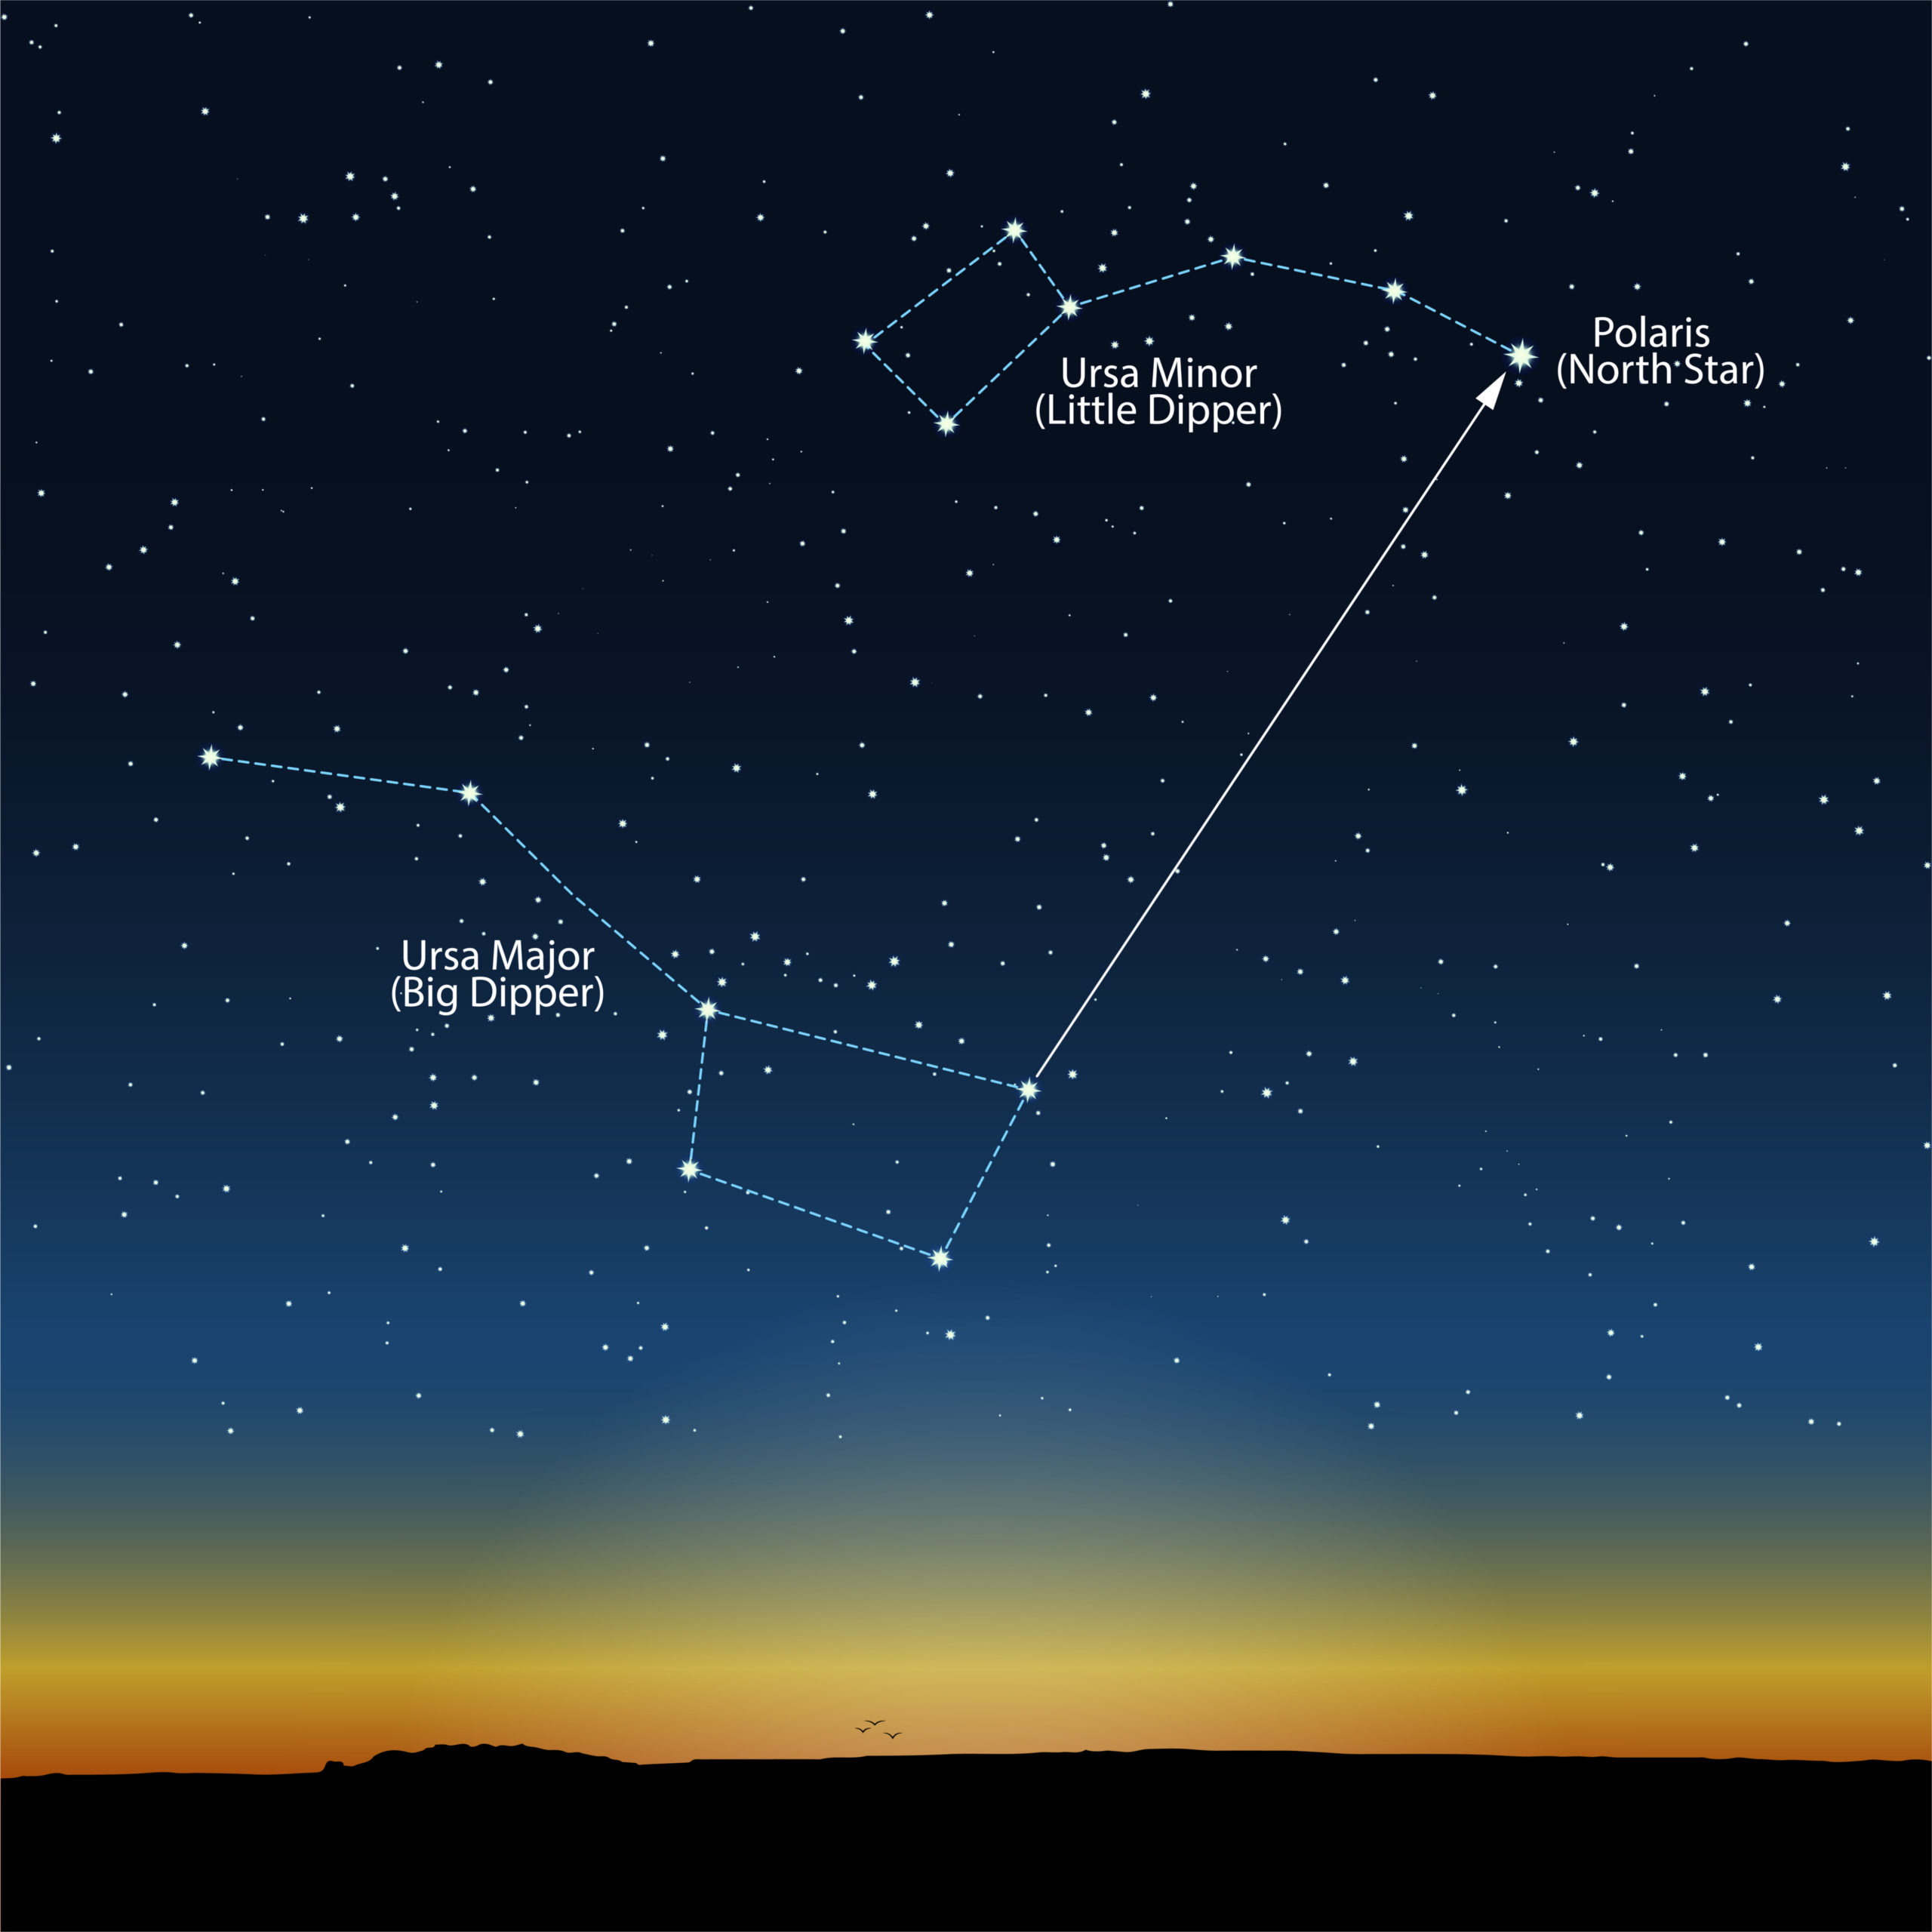 https://www.science-sparks.com/wp-content/uploads/2019/10/Ursa-Major-and-Ursa-Minor-in-the-Sky-scaled.jpg